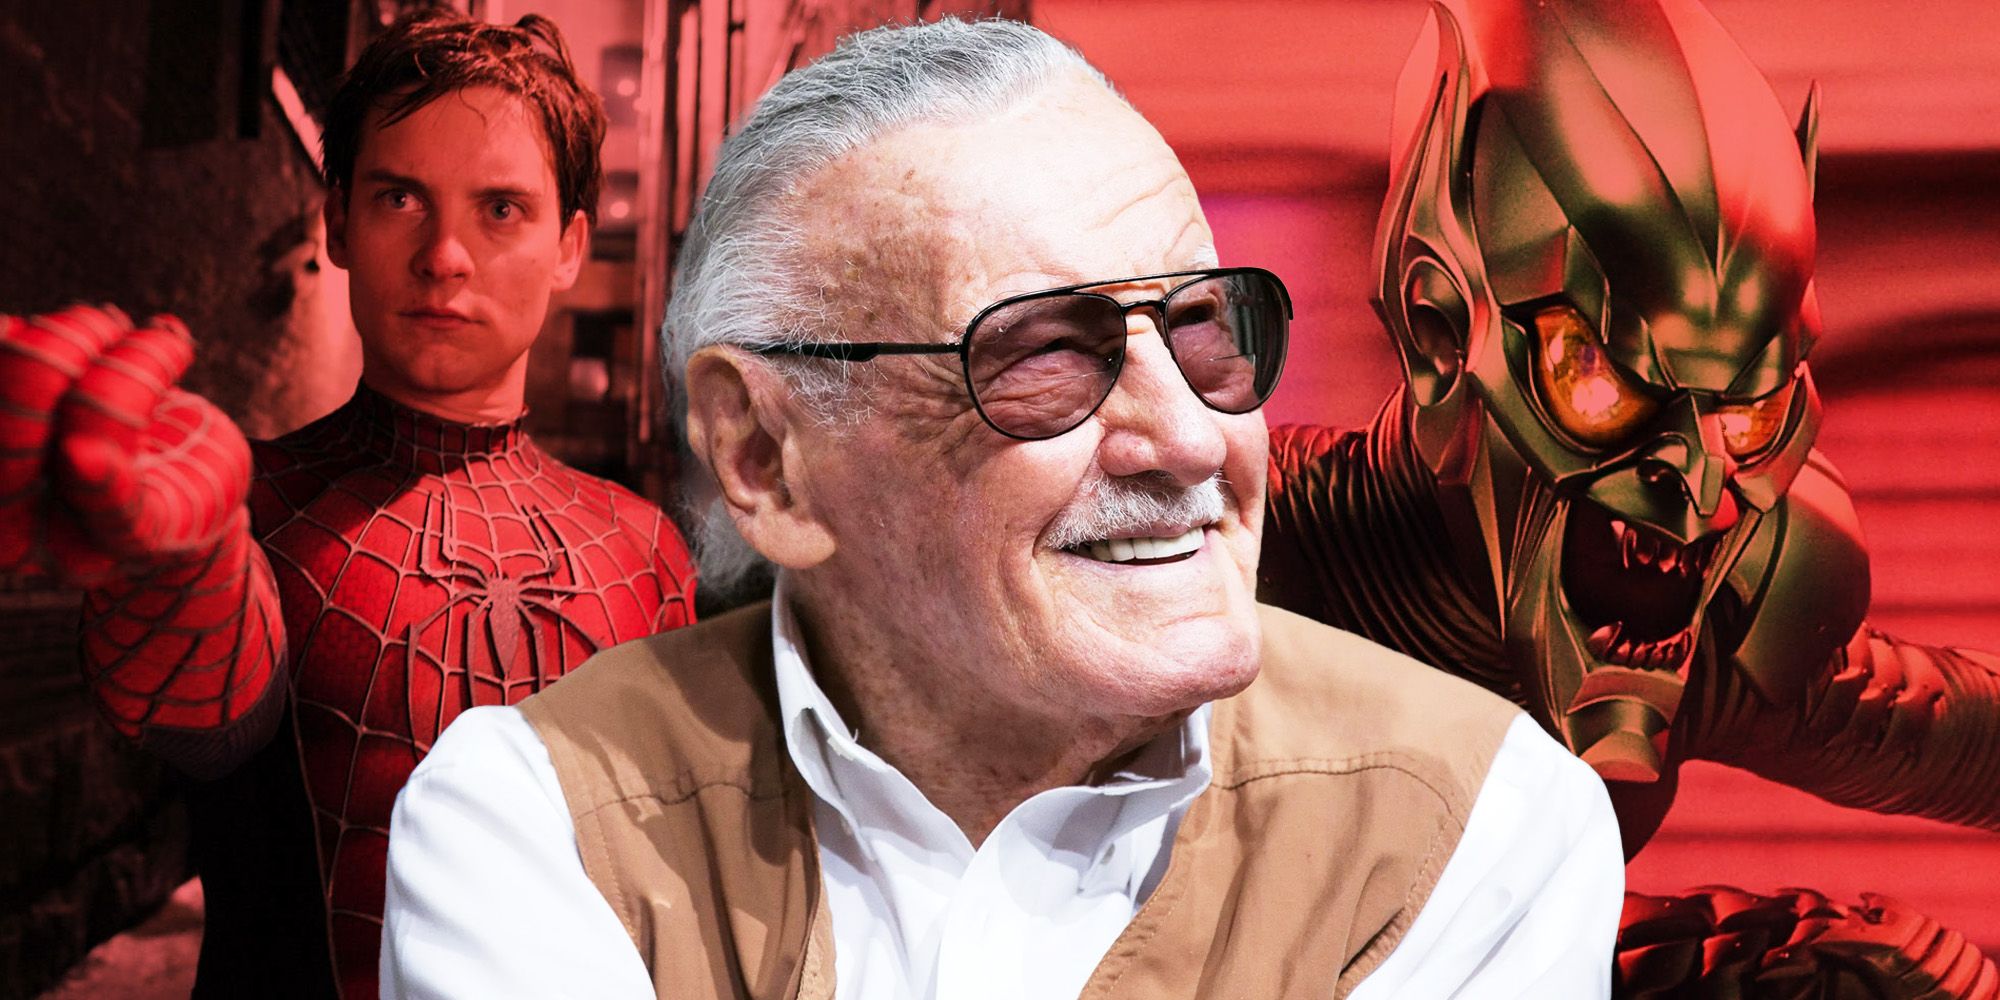 Stan Lee's Original Spider-Man Cameo Would Have Changed The Trilogy